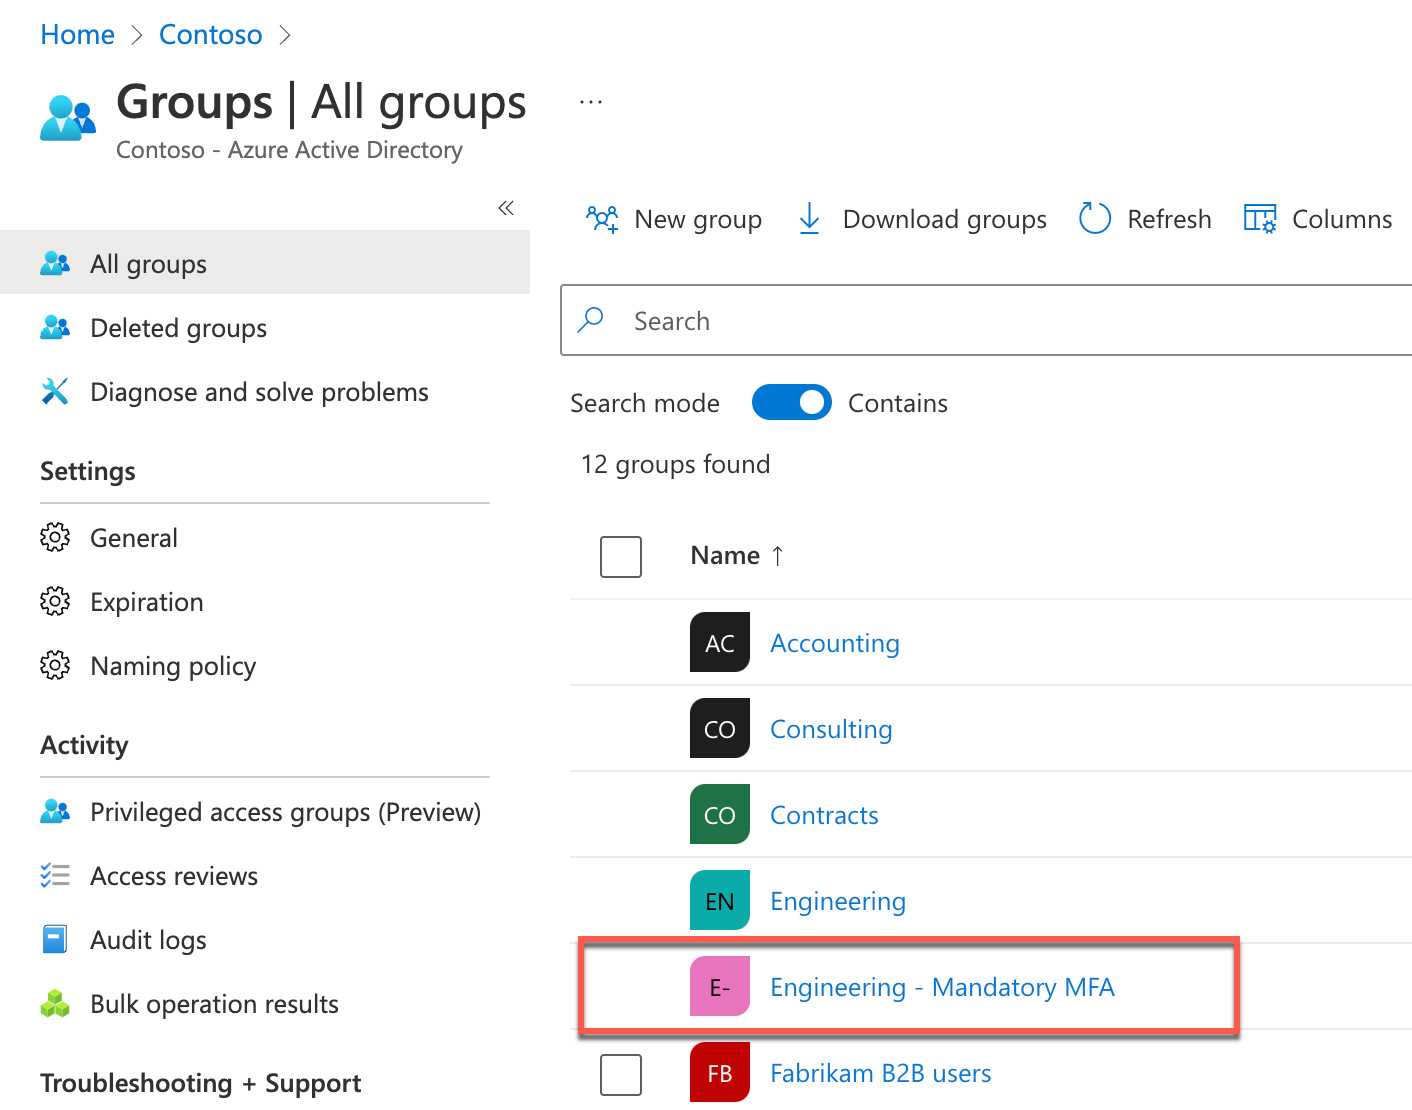 Screenshot of Azure AD All Groups showing the Engineering - Mandatory MFA Group.